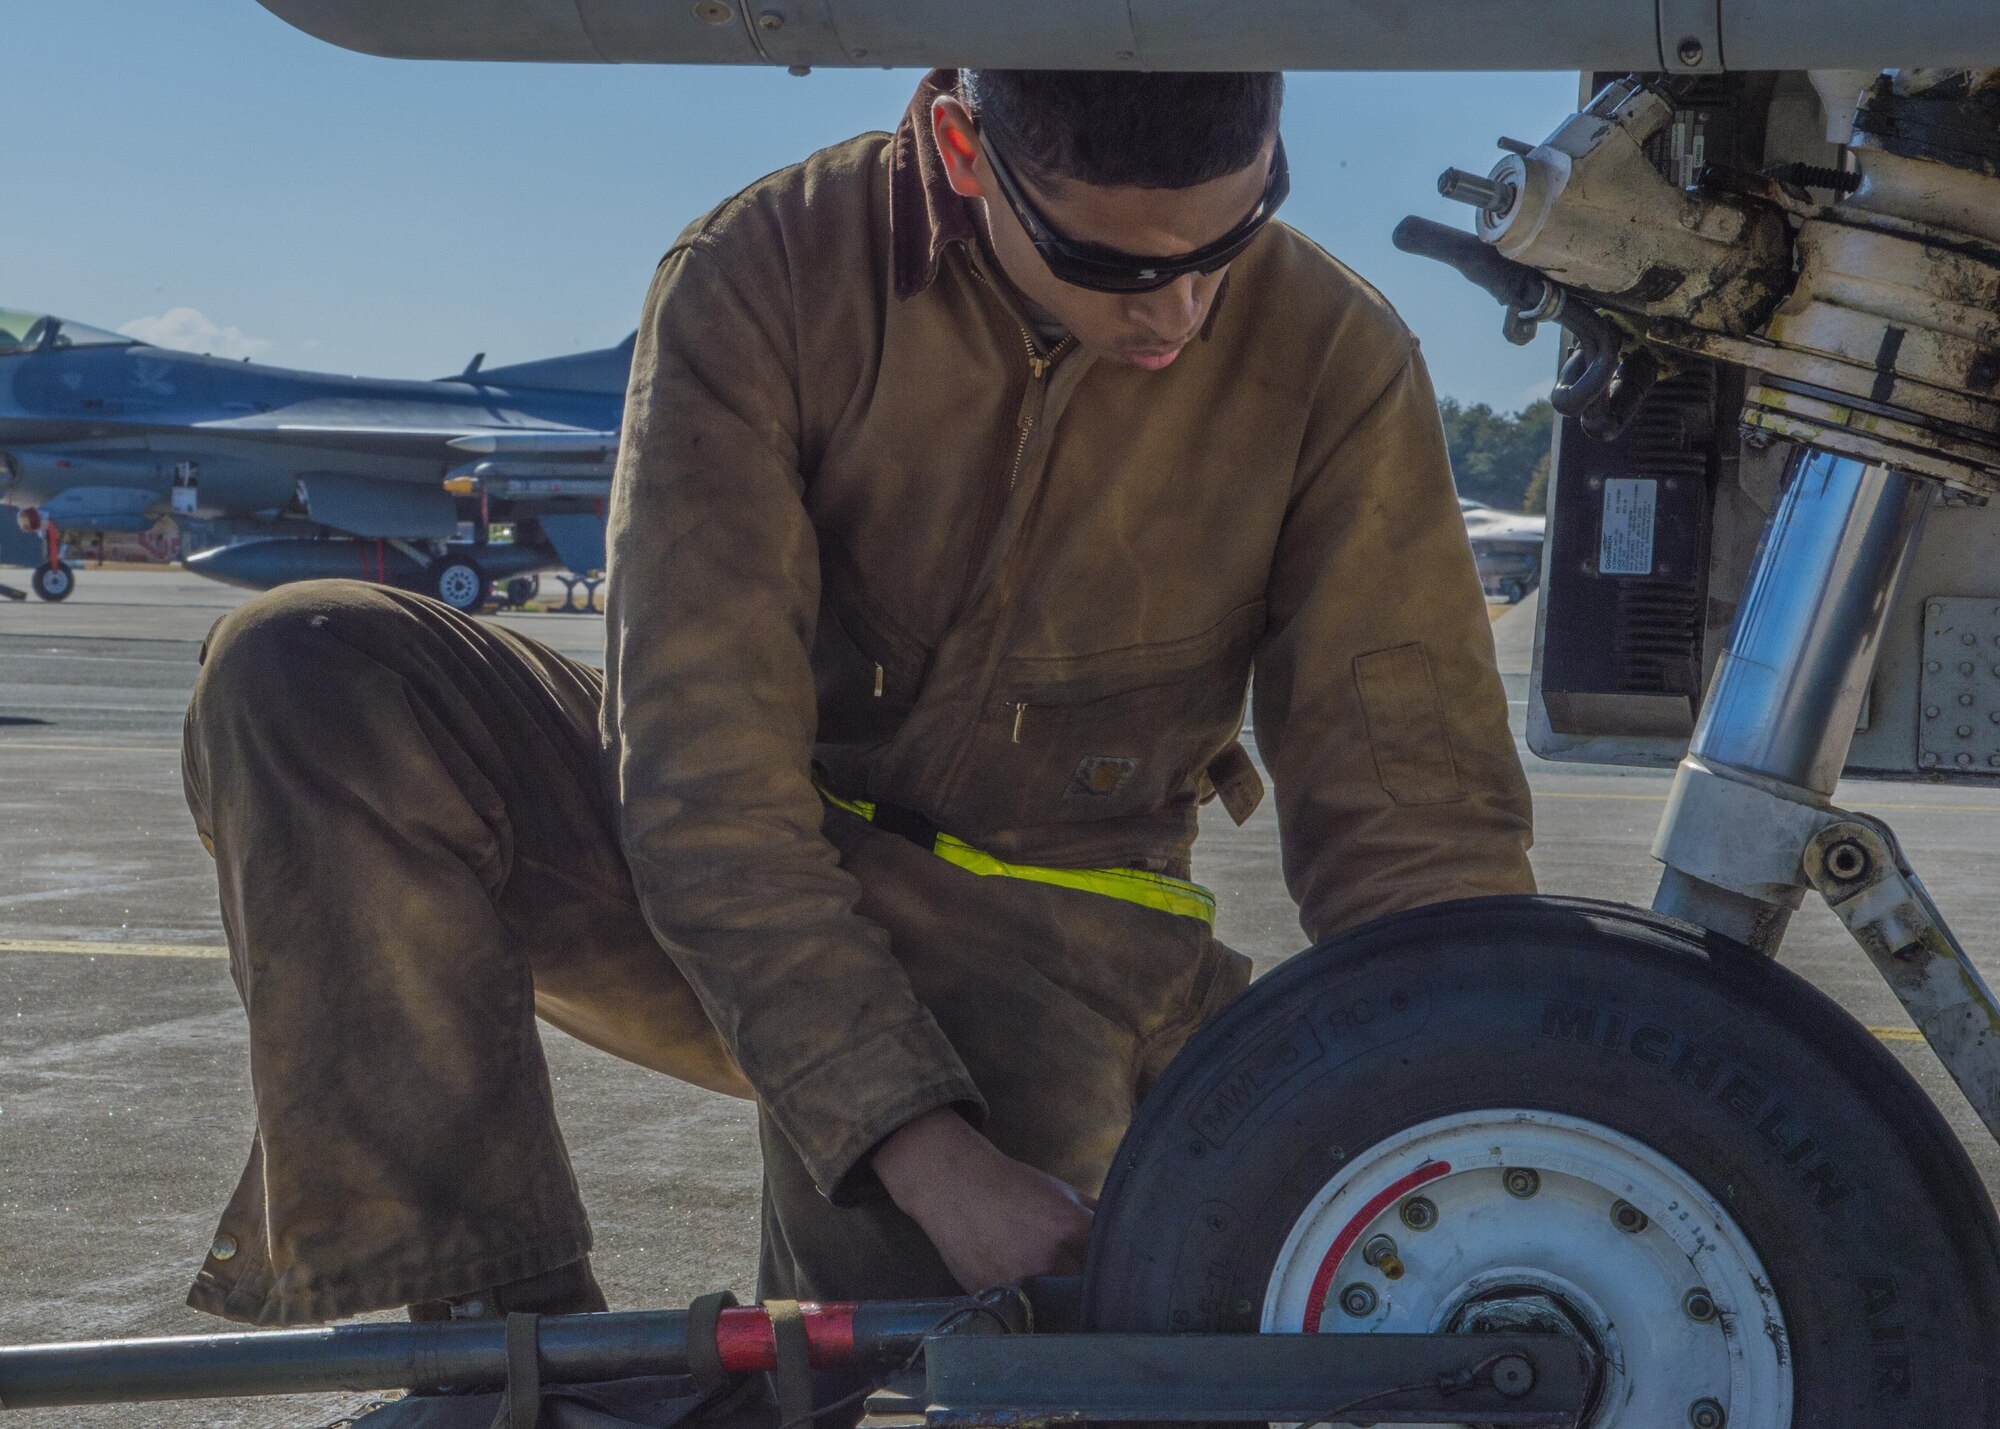 U.S. Air Force Senior Airman Kyle Lacy, a crew chief with the 35th Maintenance Squadron, performs a post-flight inspection on an F-16 Fighting Falcon during a surge exercise at Misawa Air Base, Japan, April 5, 2016. After aircraft land and return to their assigned crew chief, a post-flight inspection is conducted to ensure the aircraft didn’t accrue damage. During the two-day operation, the amount of time allotted for these inspections is decreased which heightens the tempo and simulates a combat environment. (U.S. Air Force photo/Airman 1st Class Jordyn Fetter/Released)